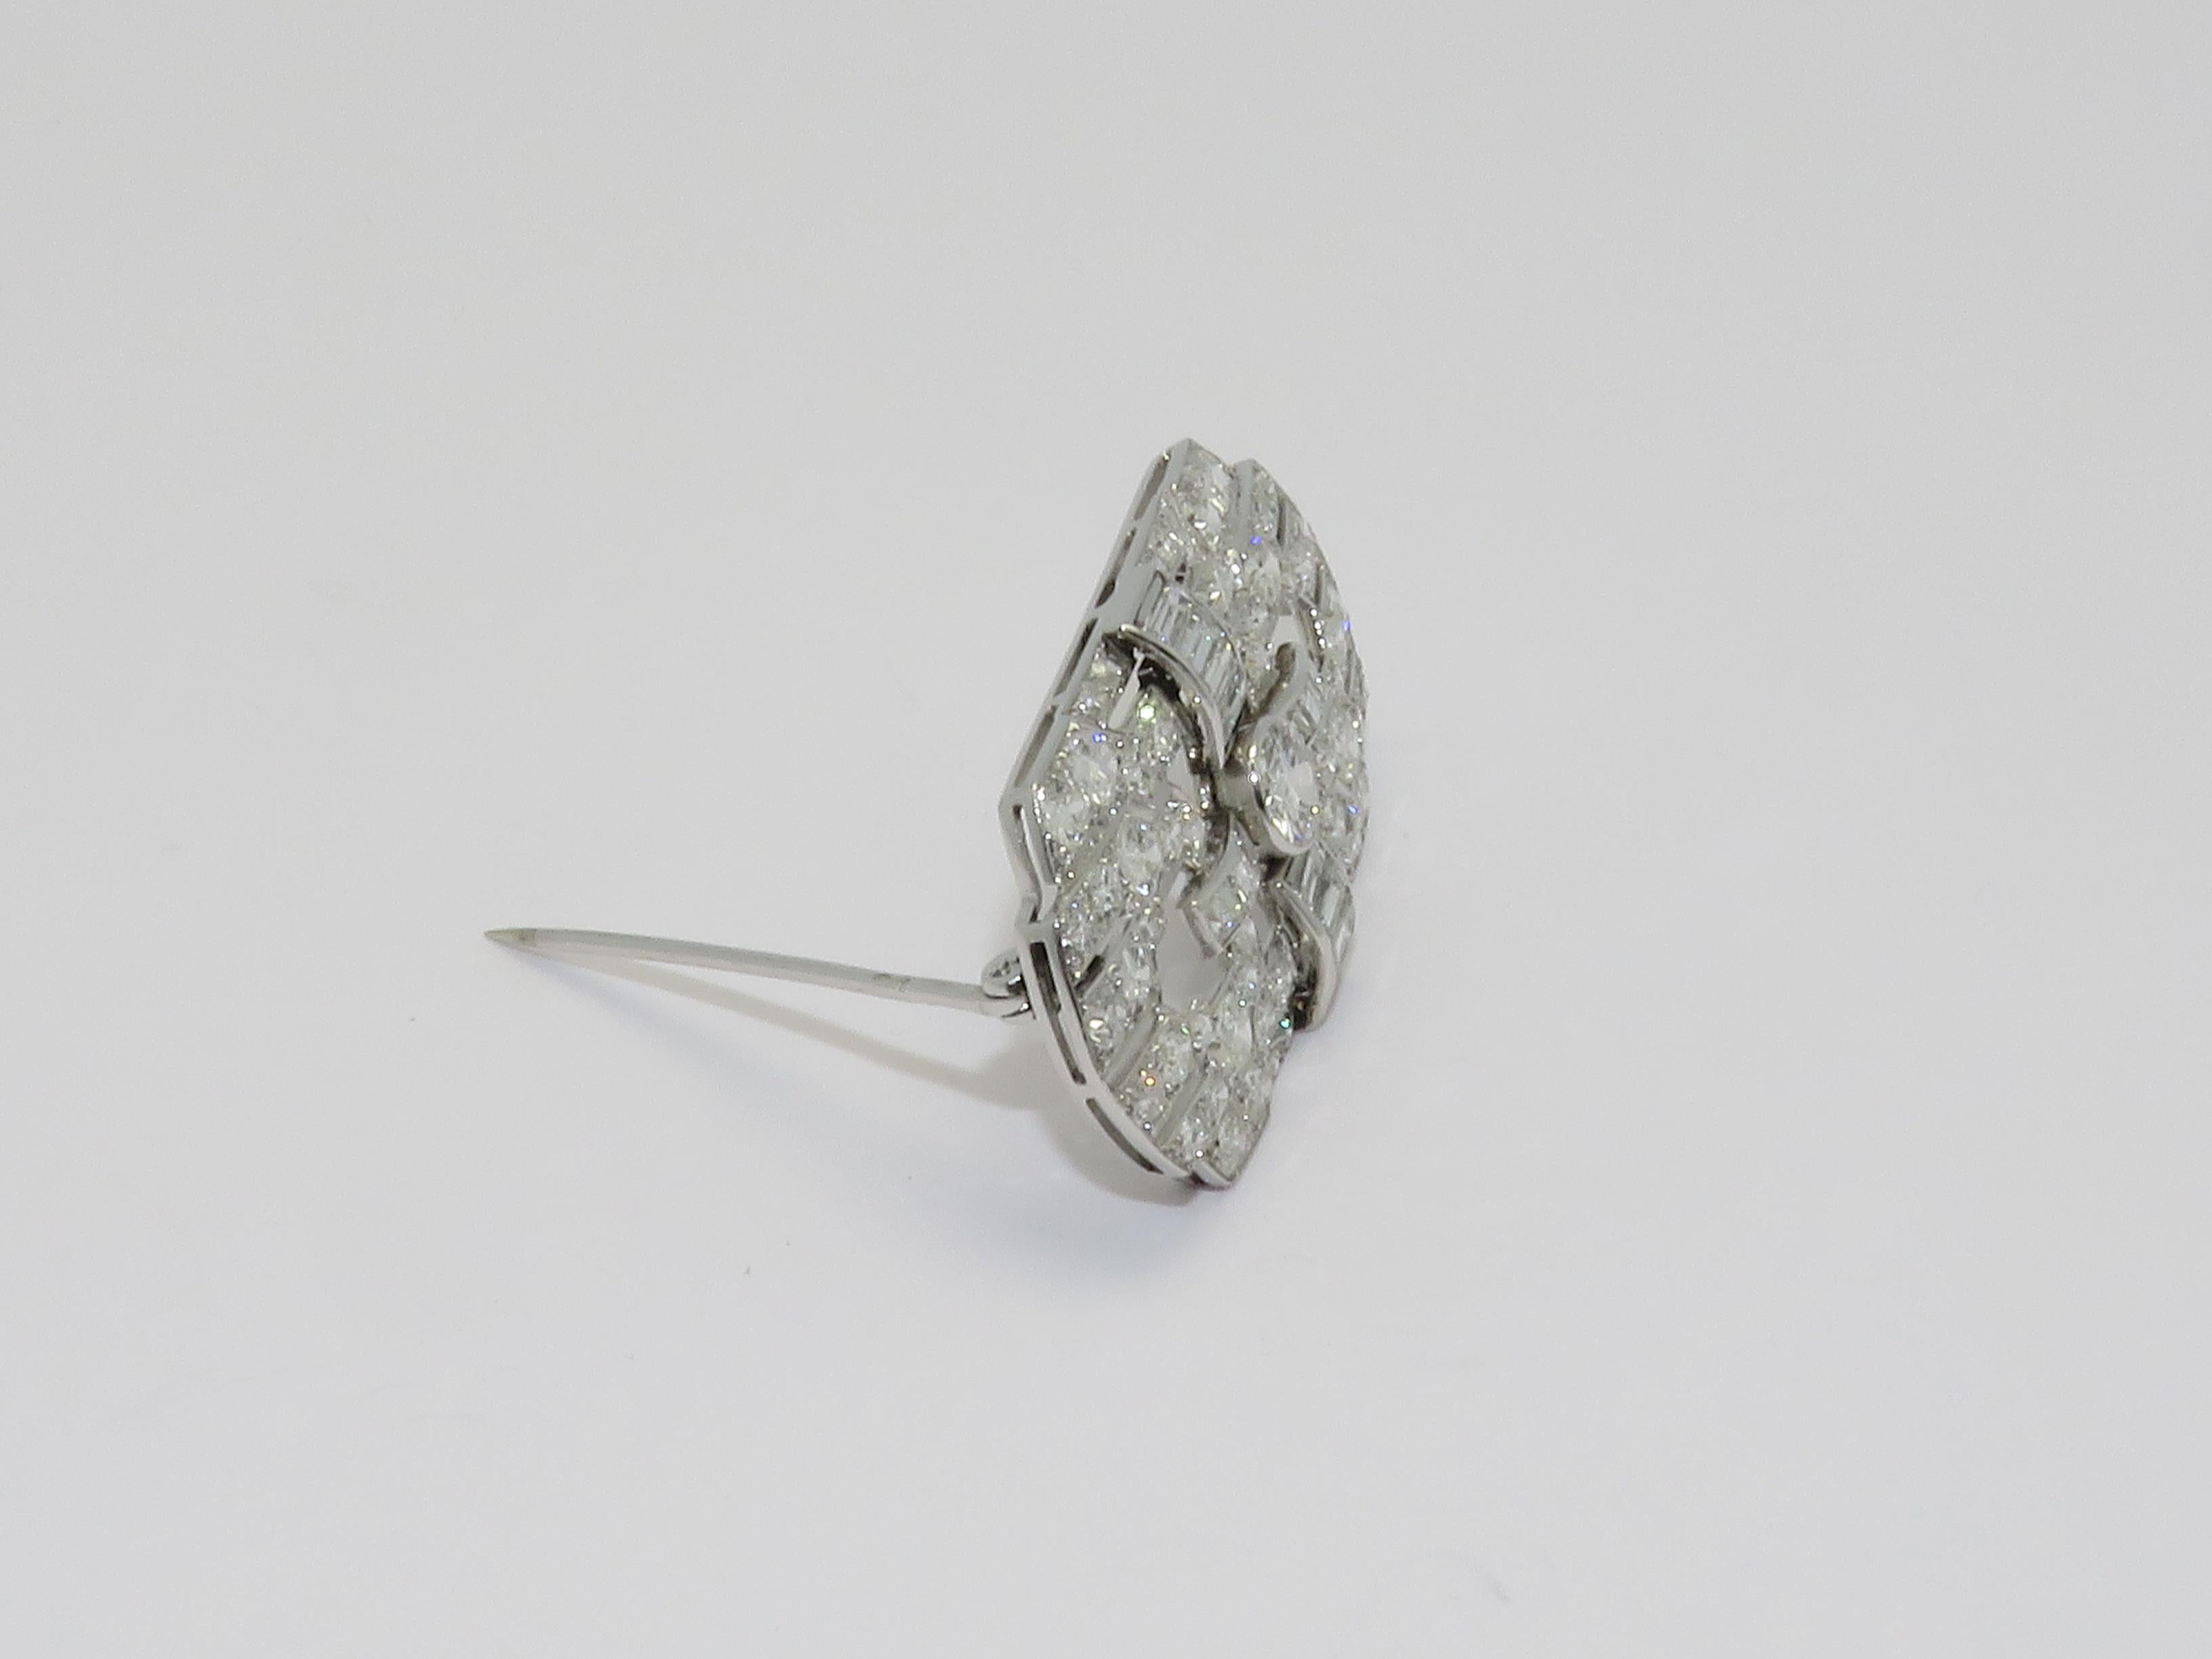 Baguette-cut diamonds and brilliant cut diamonds.
Weight Diamond approximately: 5 carats

Measurements:
Length: 1.57 in ( 4 cm )
Width: 0.87 in ( 2.20 cm )
Weight: 9.80 grams